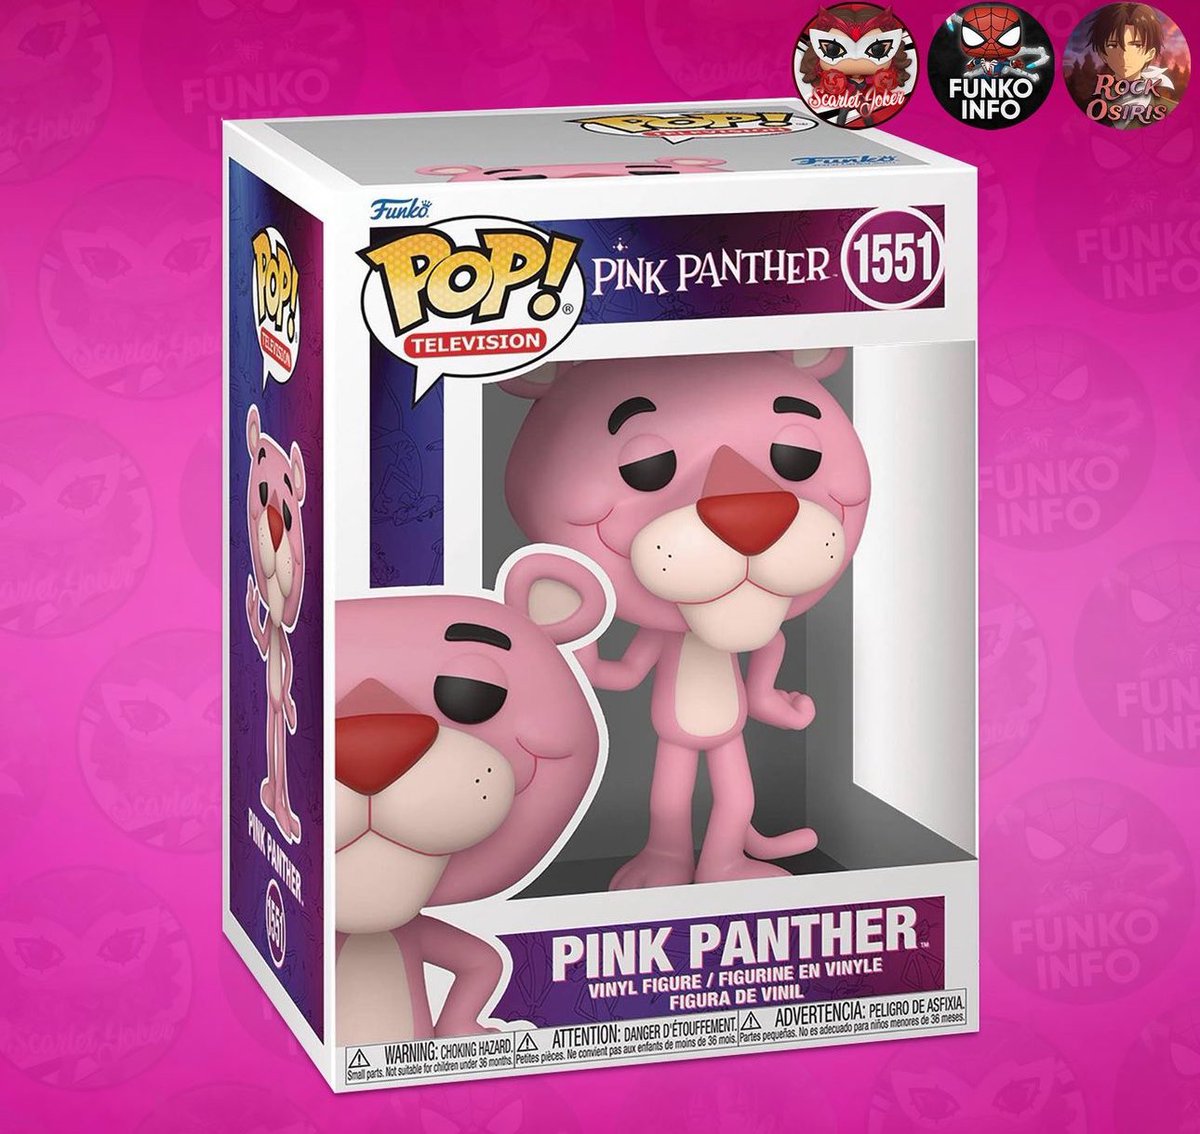 First look at Pink Panther! . Repost @rockosiris_ #PinkPanther #Funko #FunkoPop #FunkoPopVinyl #Pop #PopVinyl #Collectibles #Collectible #FunkoCollector #FunkoPops #Collector #Toy #Toys #DisTrackers